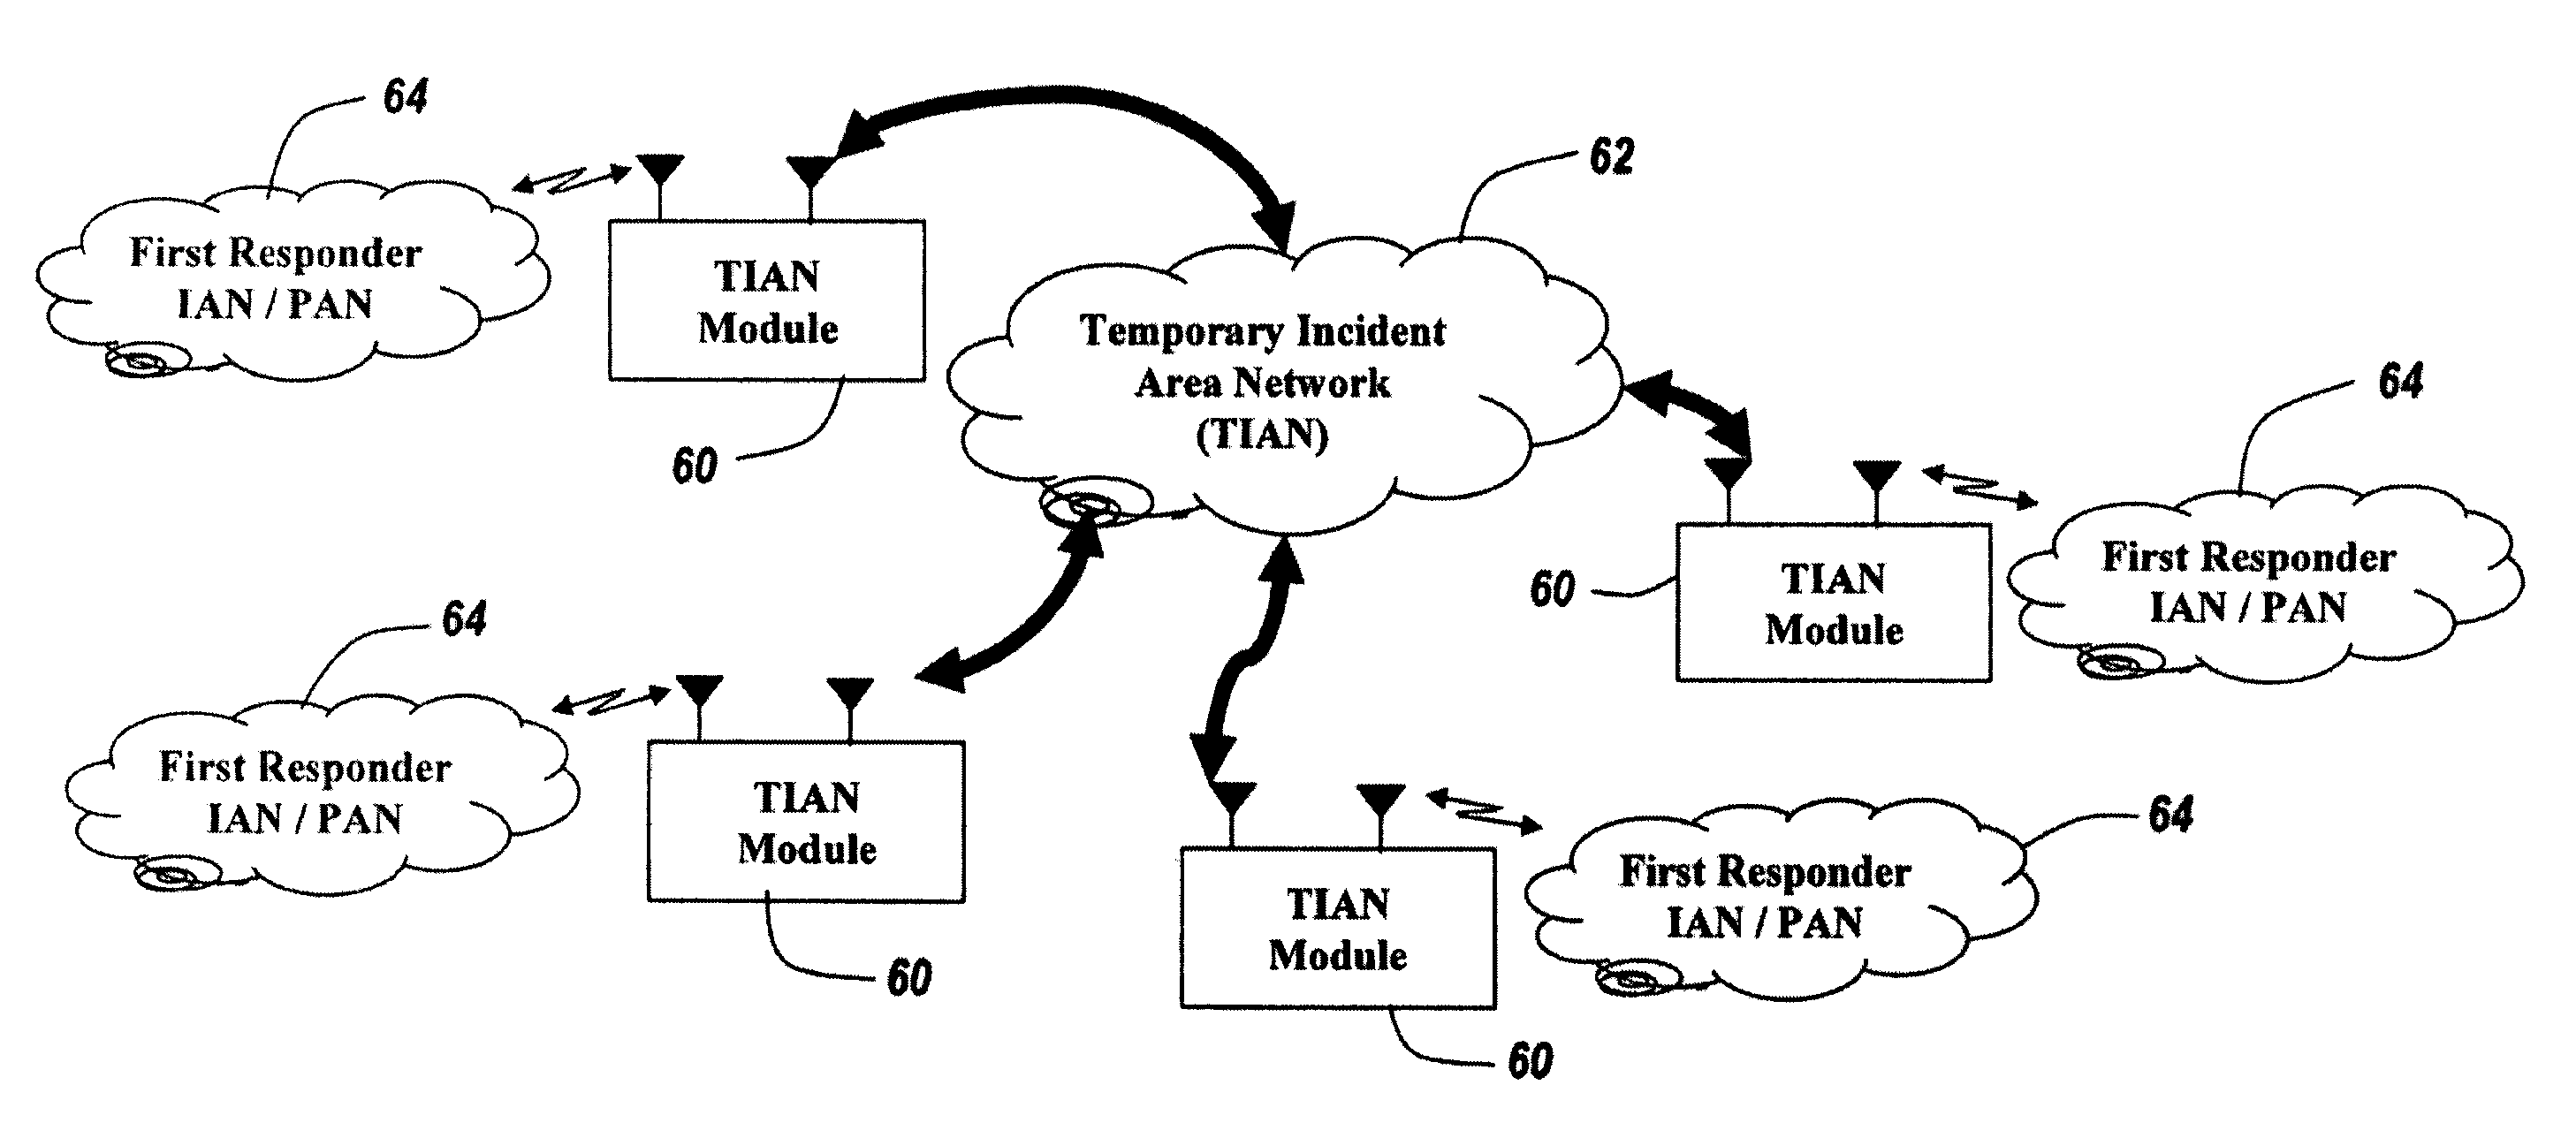 Mobile temporary incident area network for local communications interoperability